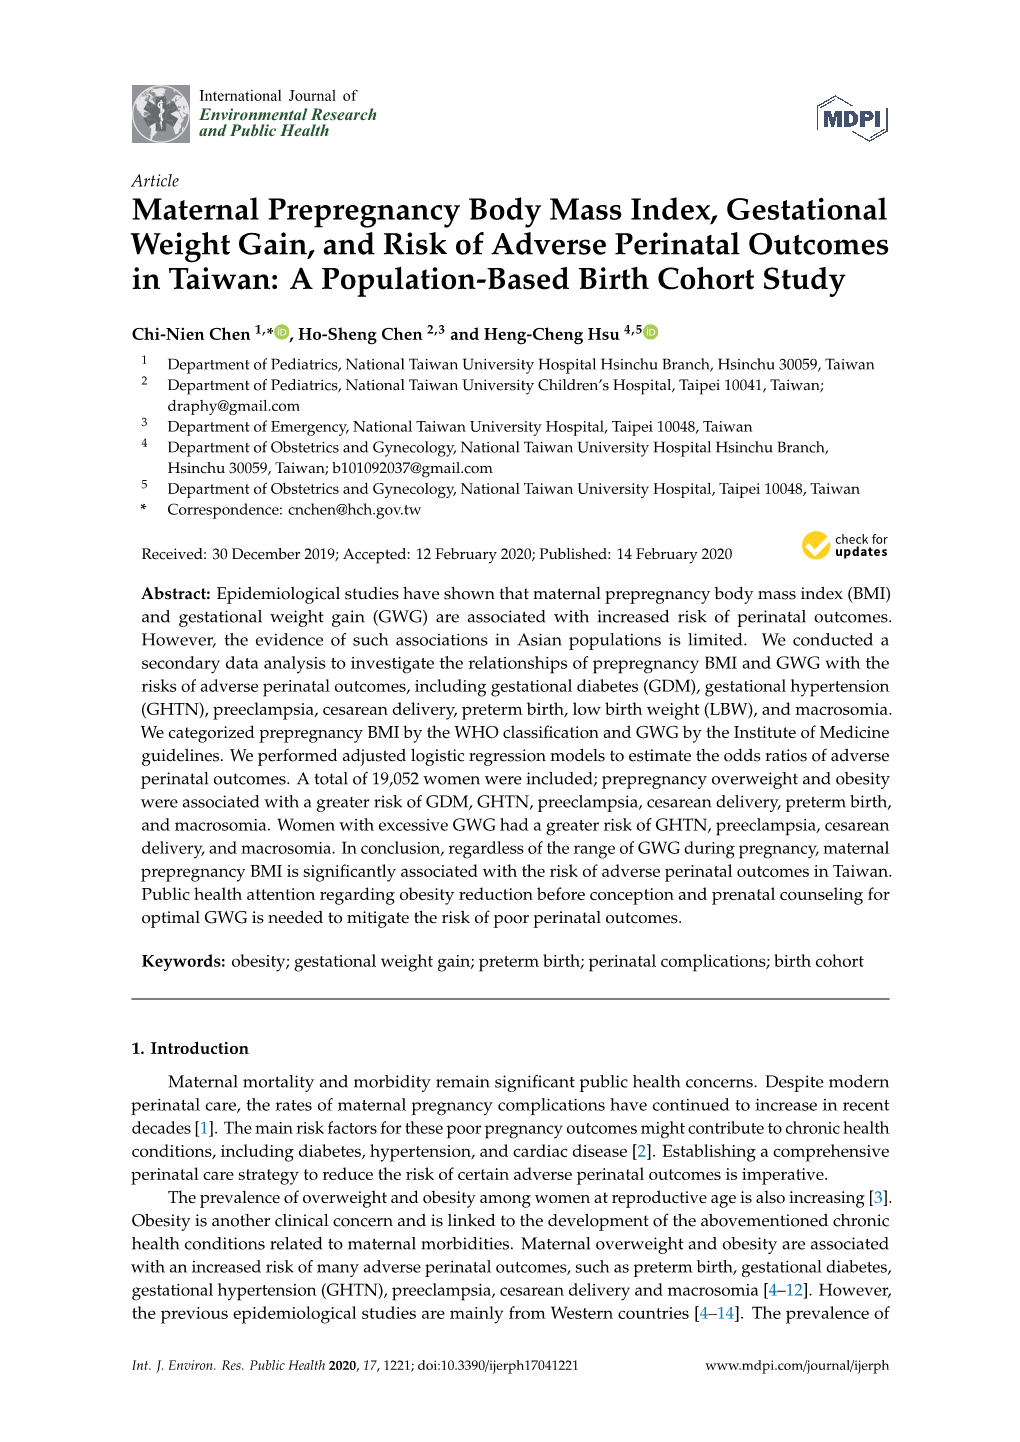 Maternal Prepregnancy Body Mass Index, Gestational Weight Gain, and Risk of Adverse Perinatal Outcomes in Taiwan: a Population-Based Birth Cohort Study